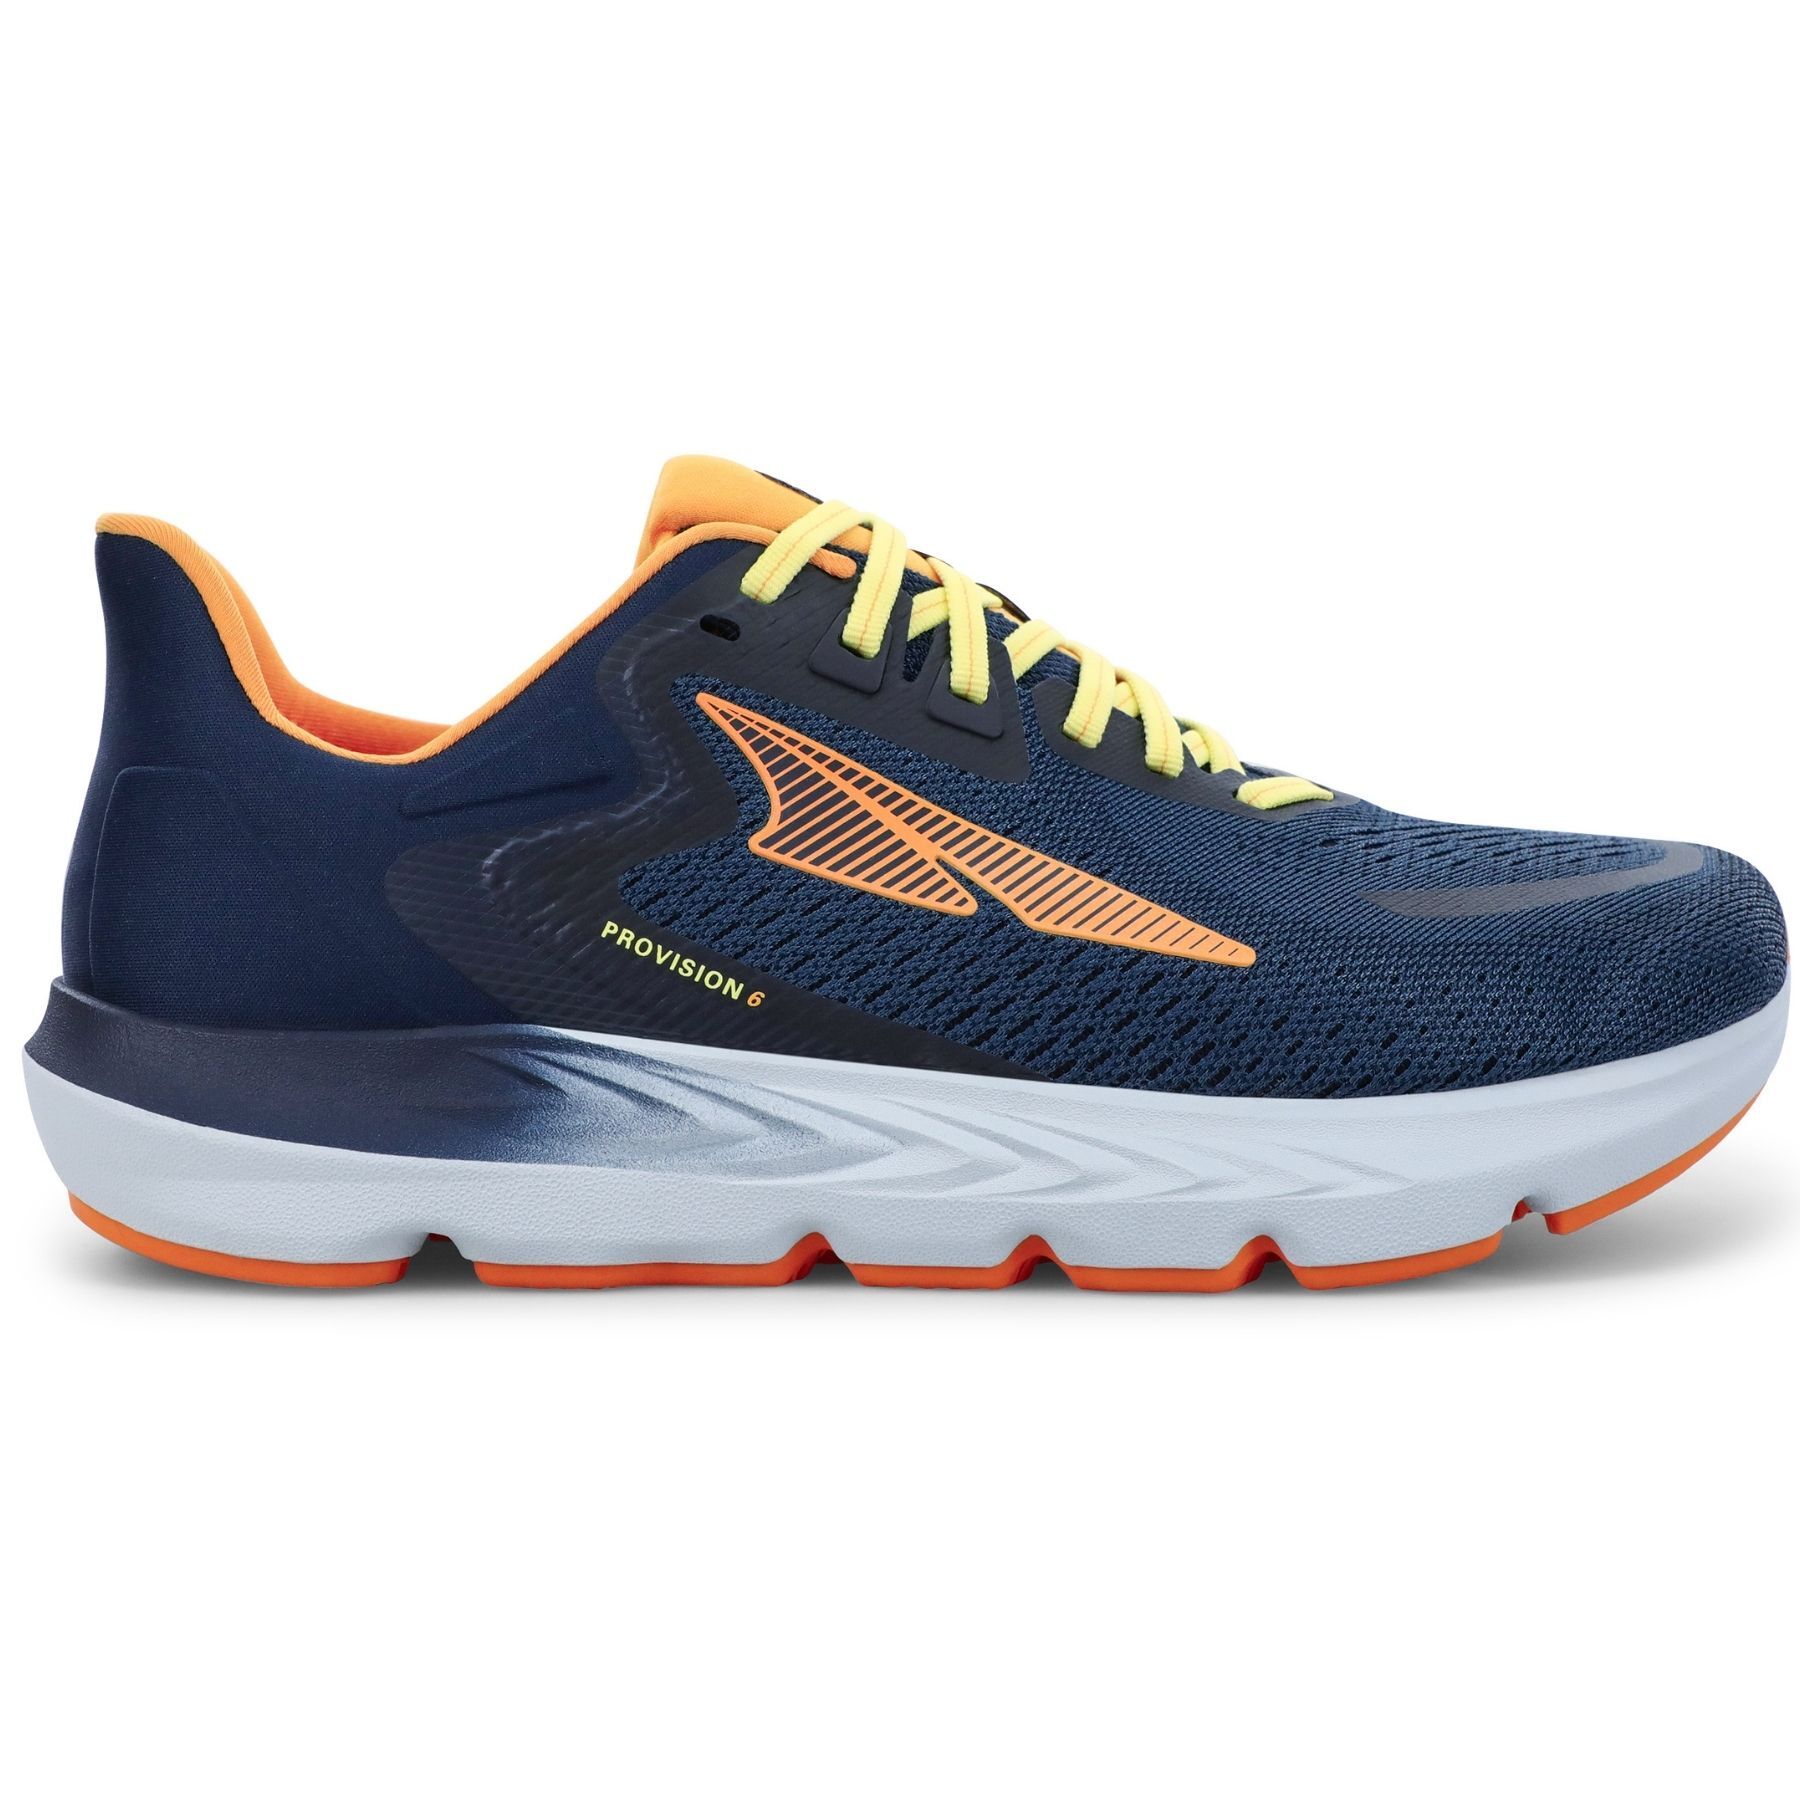 Altra Provision 6 - Running shoes - Men's